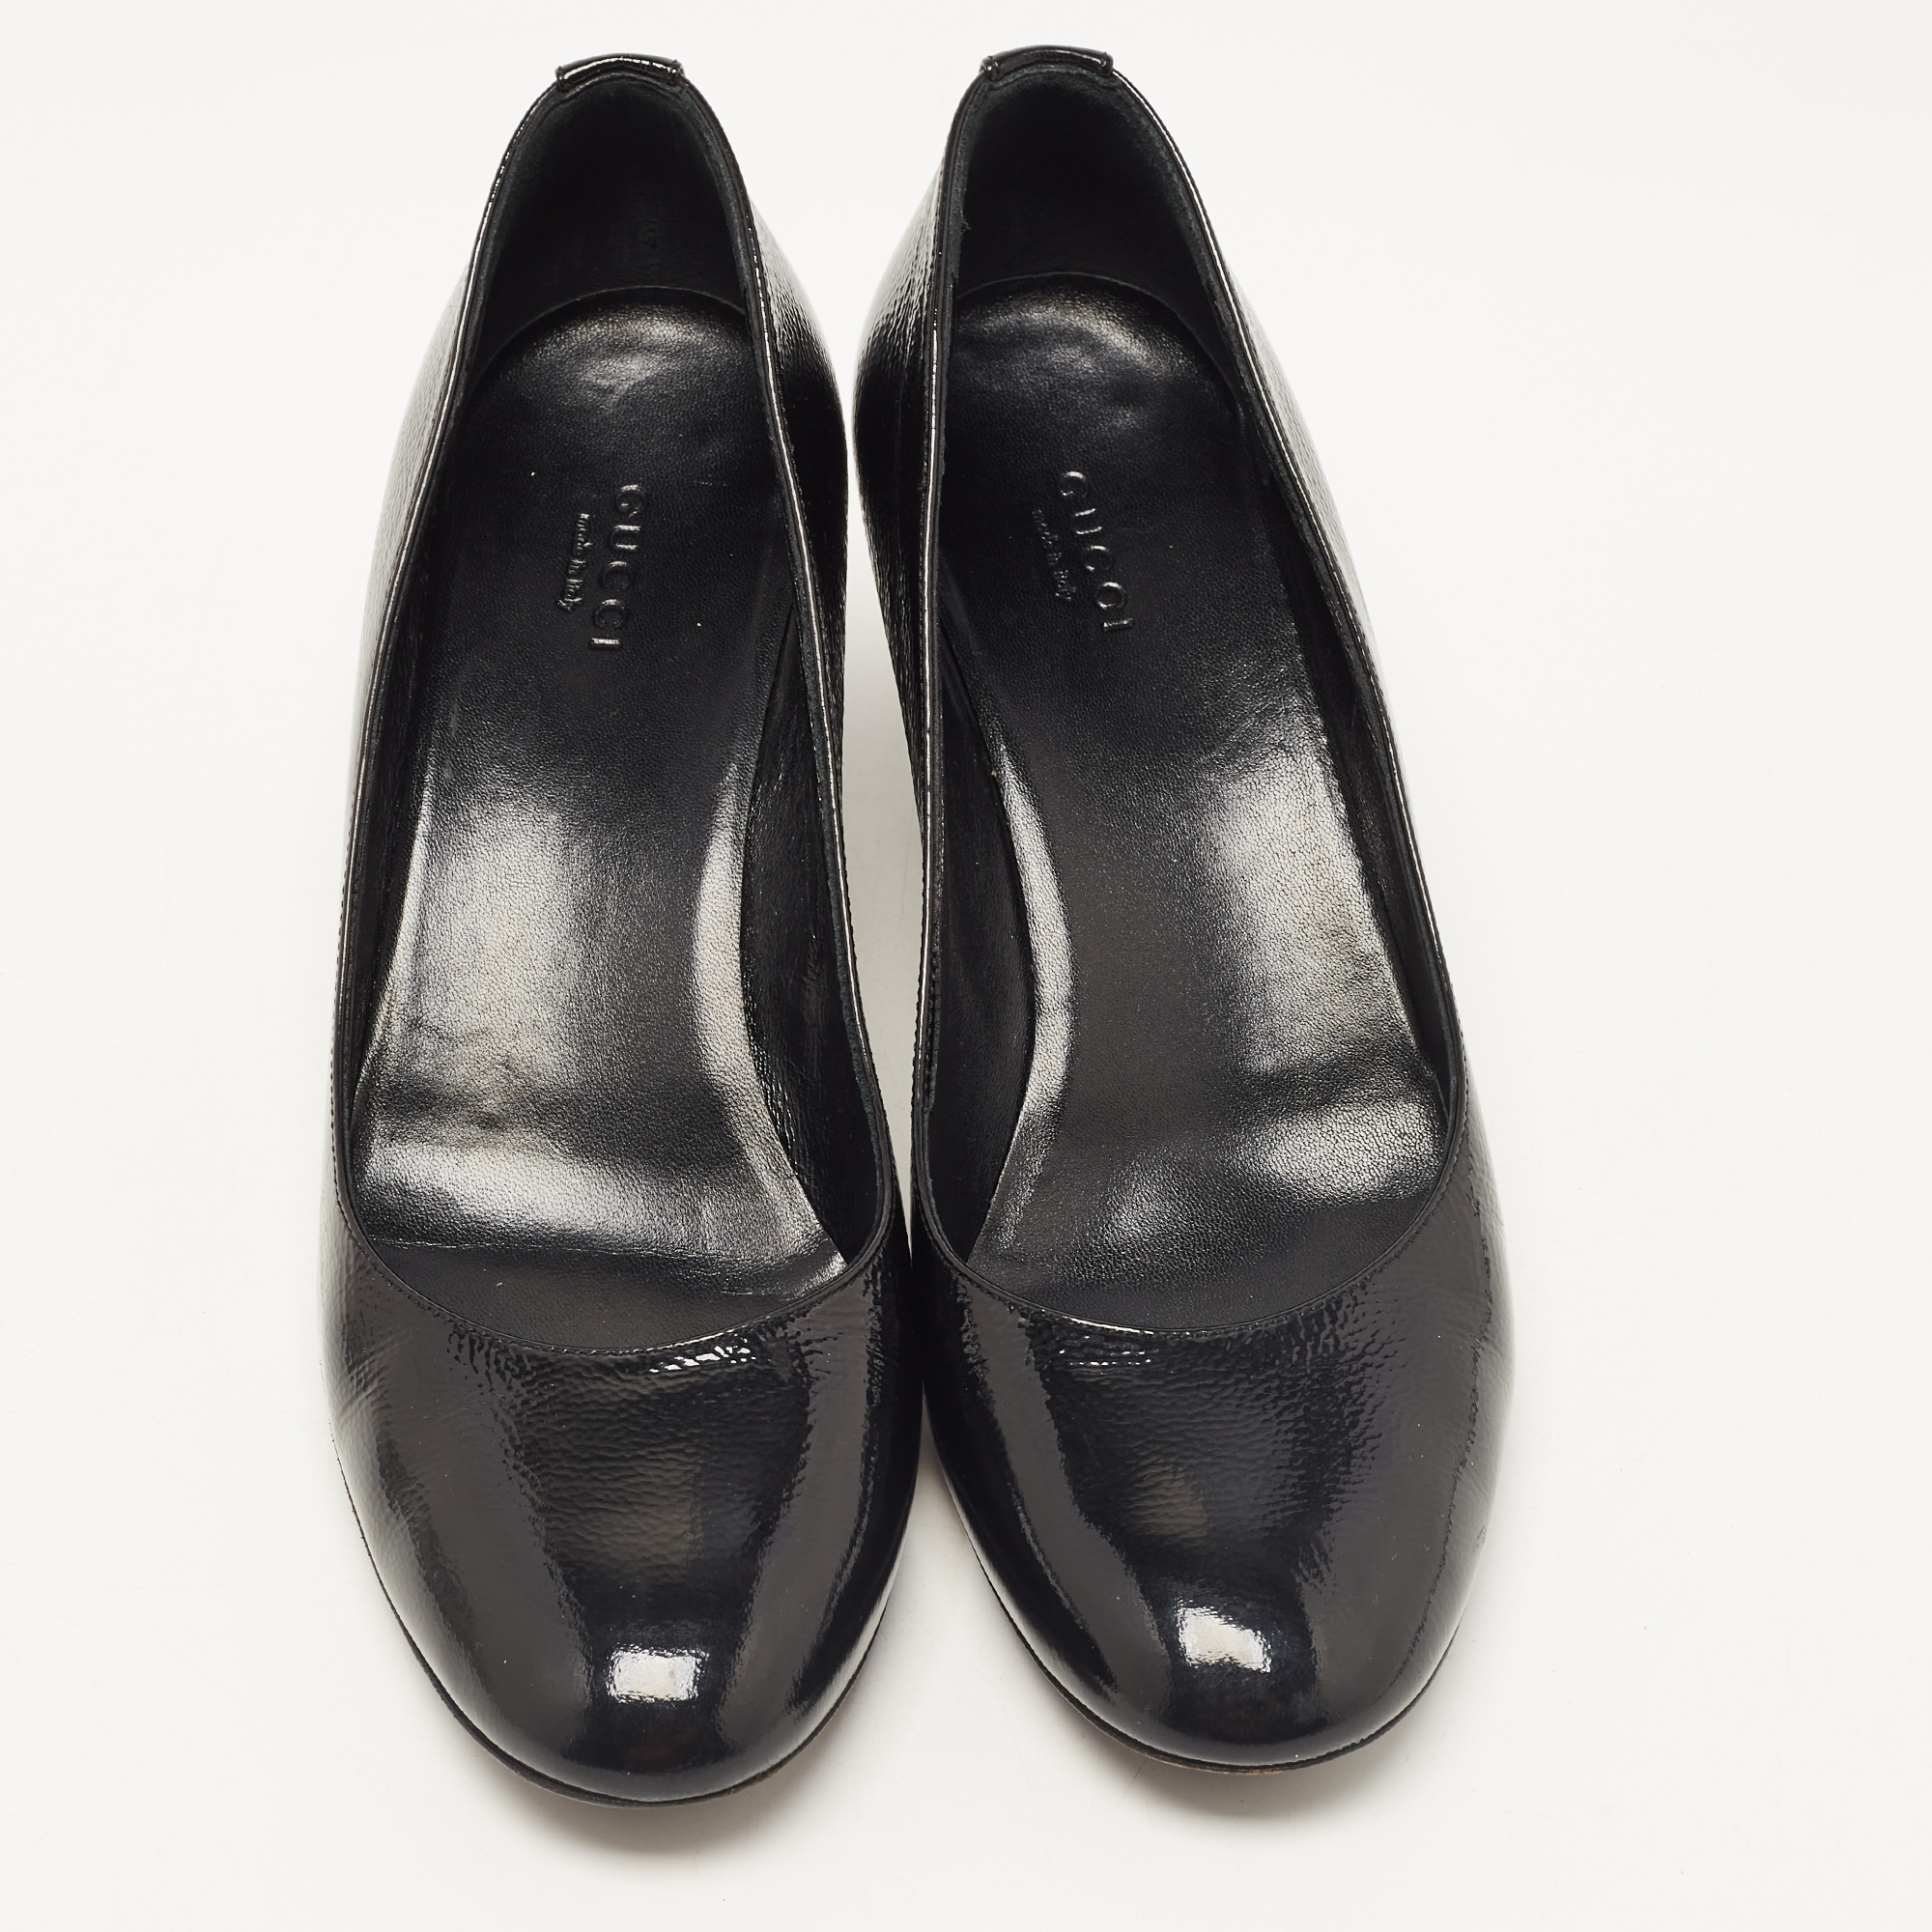 Gucci Black Patent Leather Wedge Round Toe Pumps Size 39